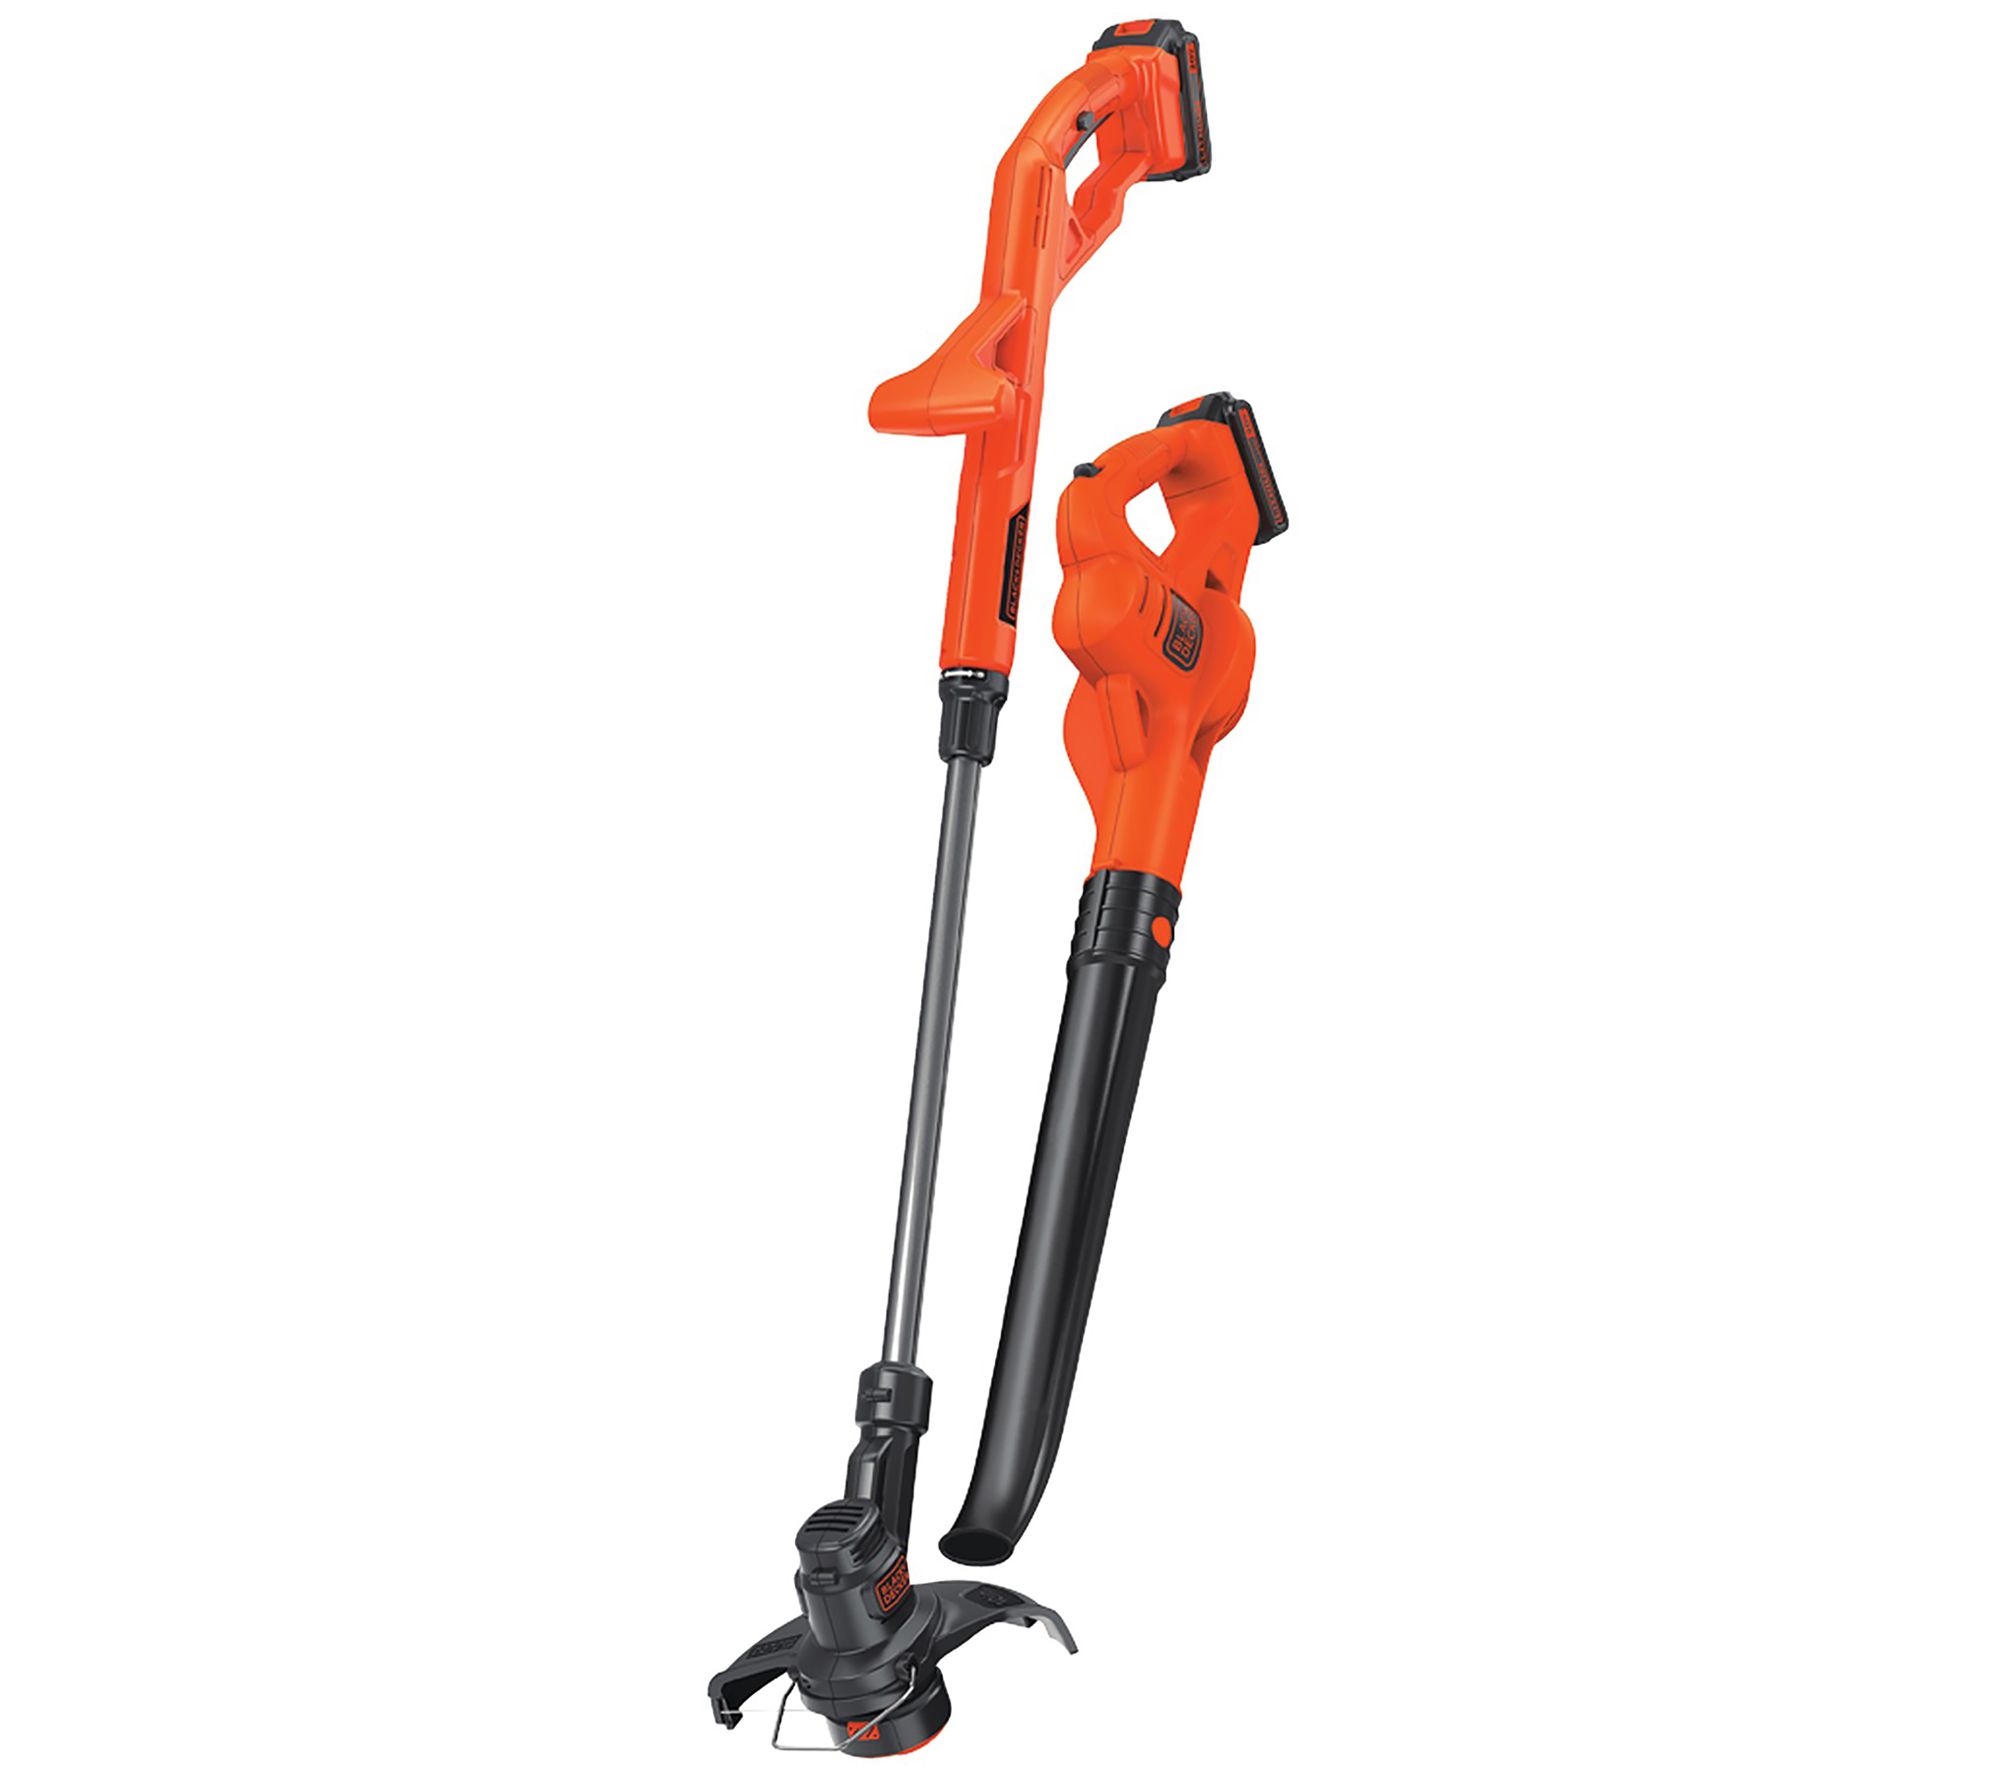 Scotts 20V Lithium iON String Trimmer and Blower Combo Pack